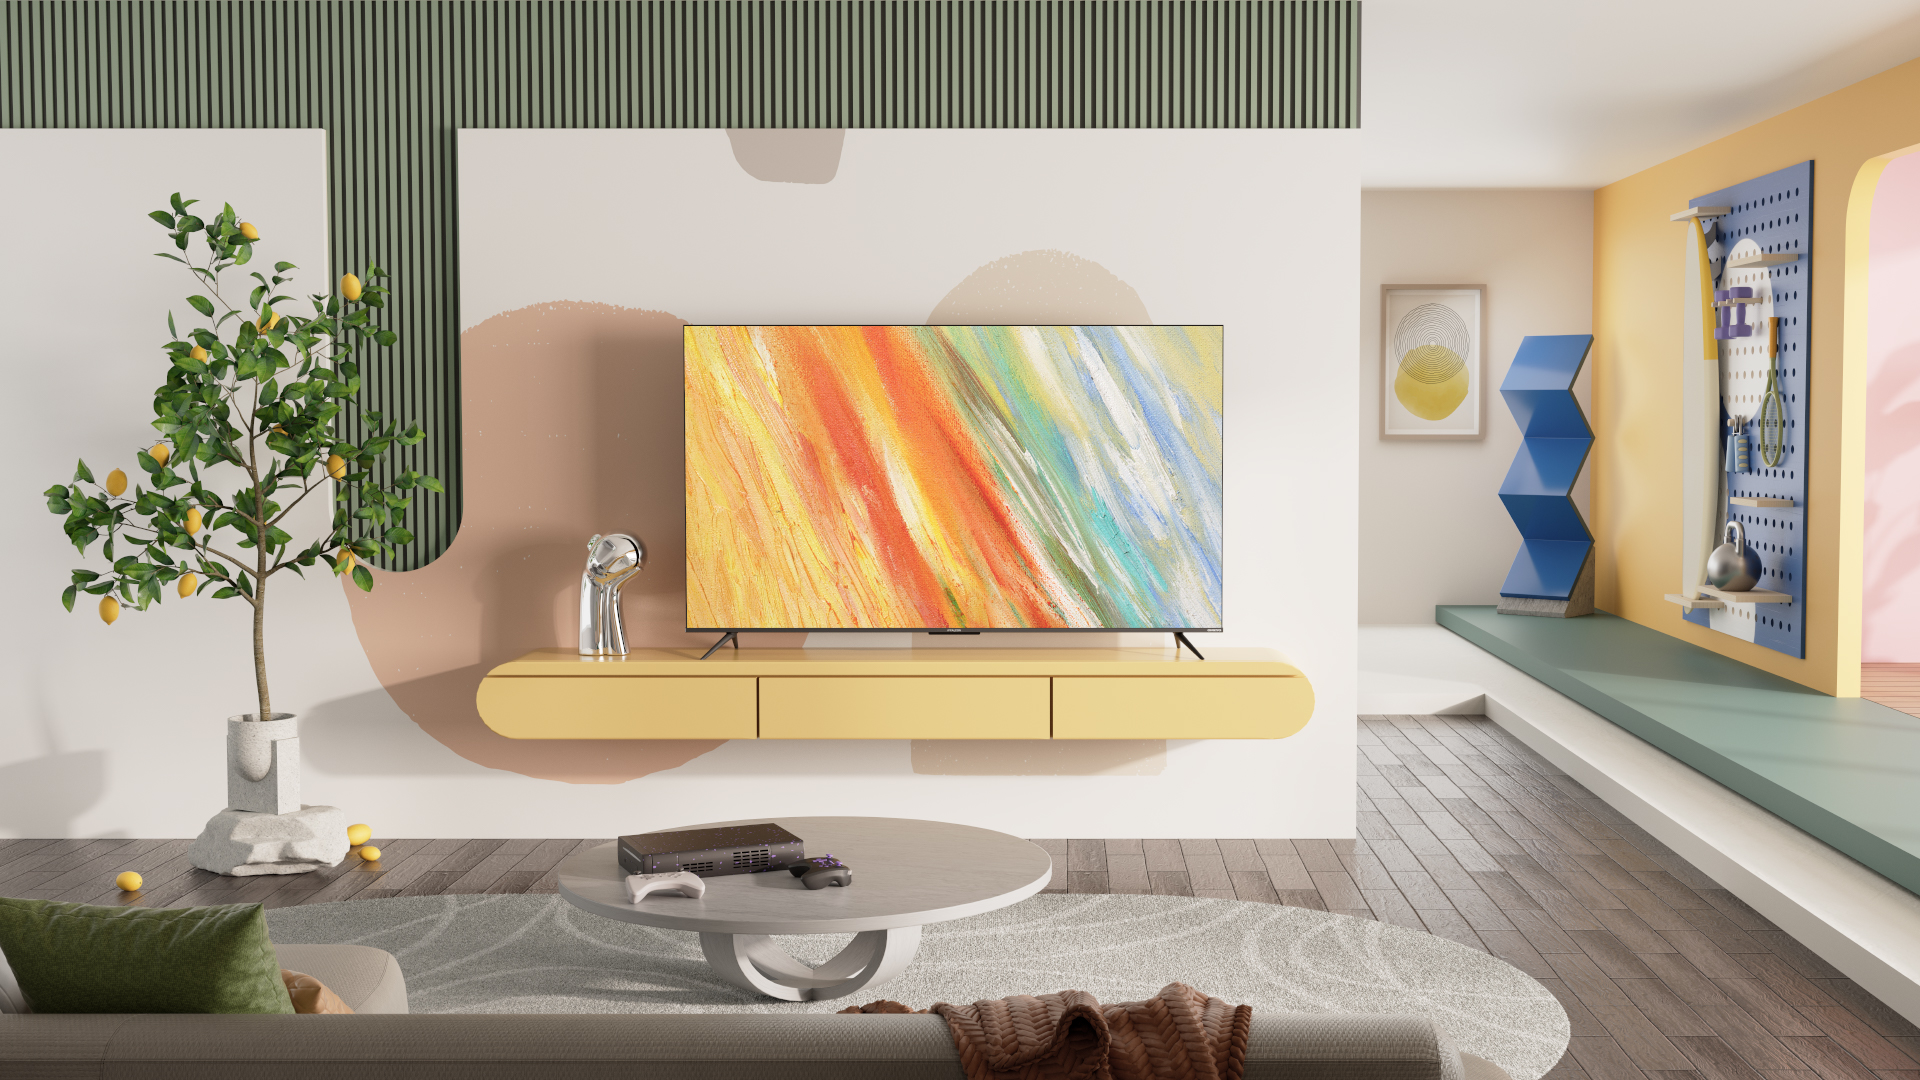 iFFALCON Q72 TV Aesthetical Design Fits Every Space